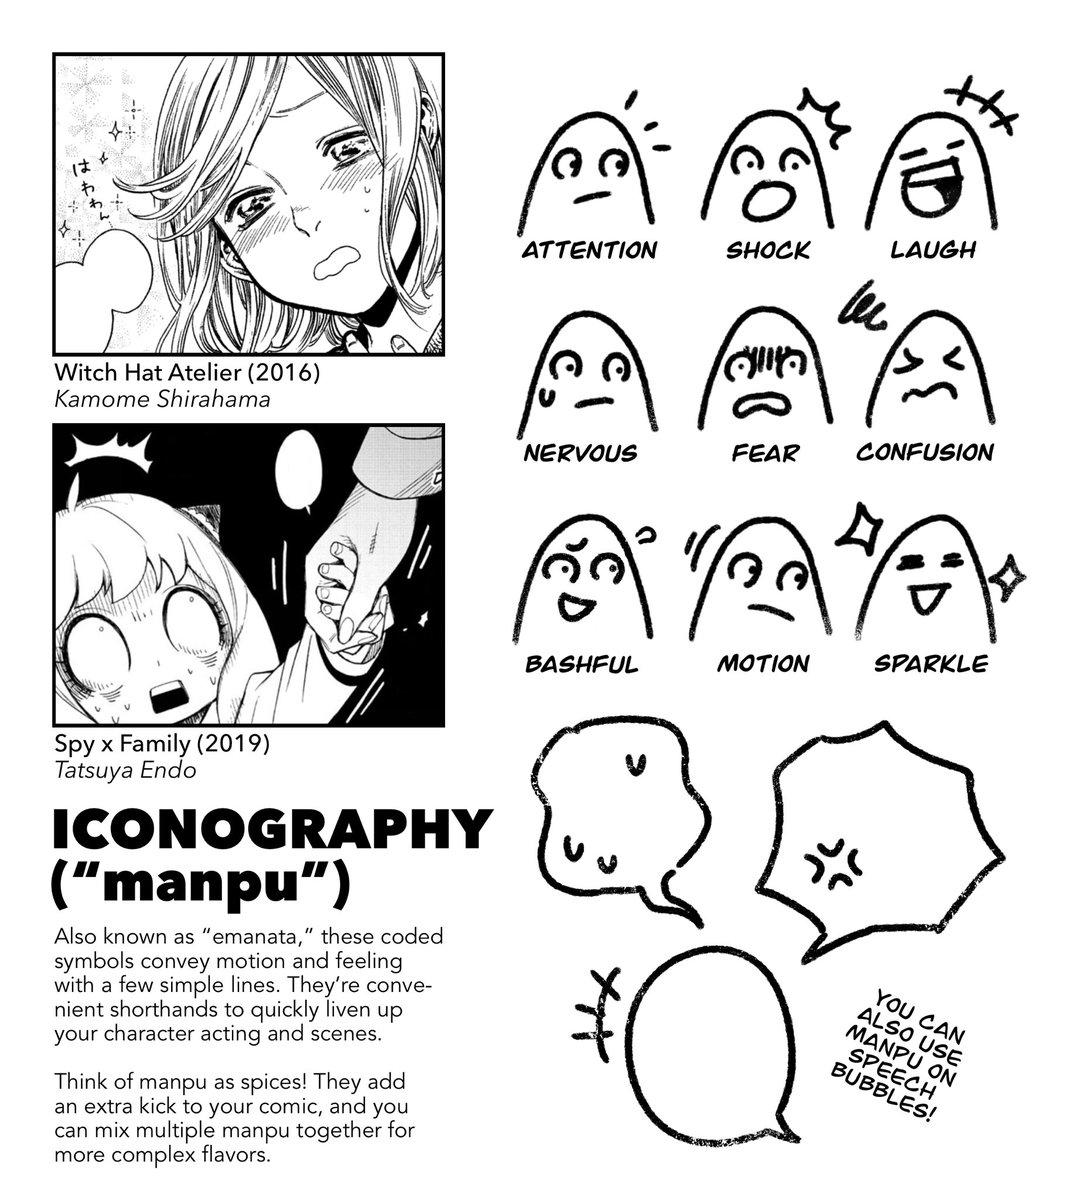 💬 Comic Tips (1/2)

Do your comics ever feel empty or clunky? Here are some tips and tricks I collected from observations/tutorials over the years. 

This is by no means comprehensive. If you have some favorite manpu/effects of your own, please share! I'd love to hear about it! 